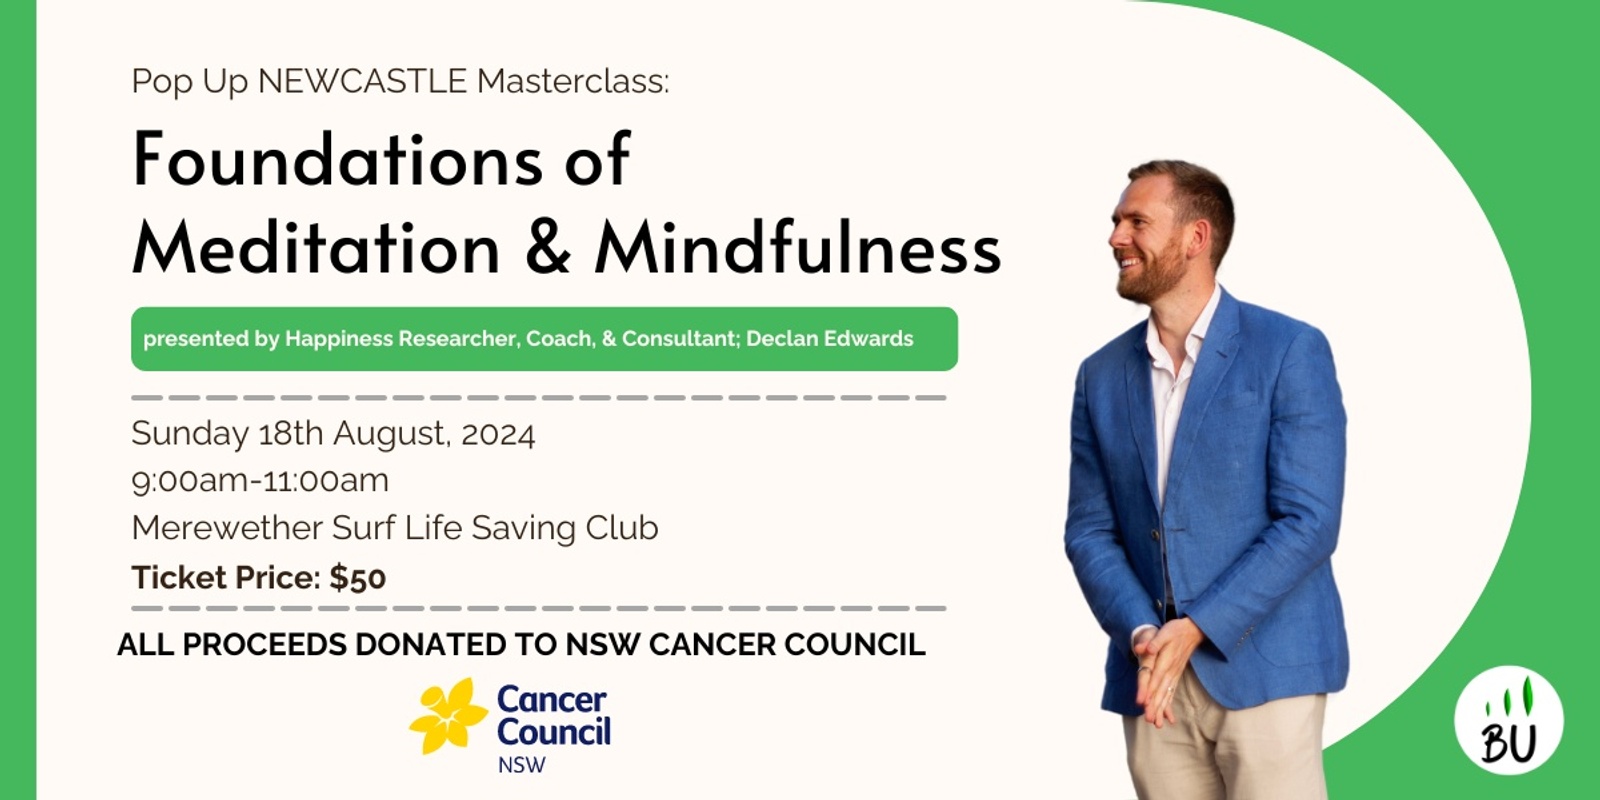 Banner image for Pop Up Newcastle Masterclass: Foundations of Meditation & Mindfulness